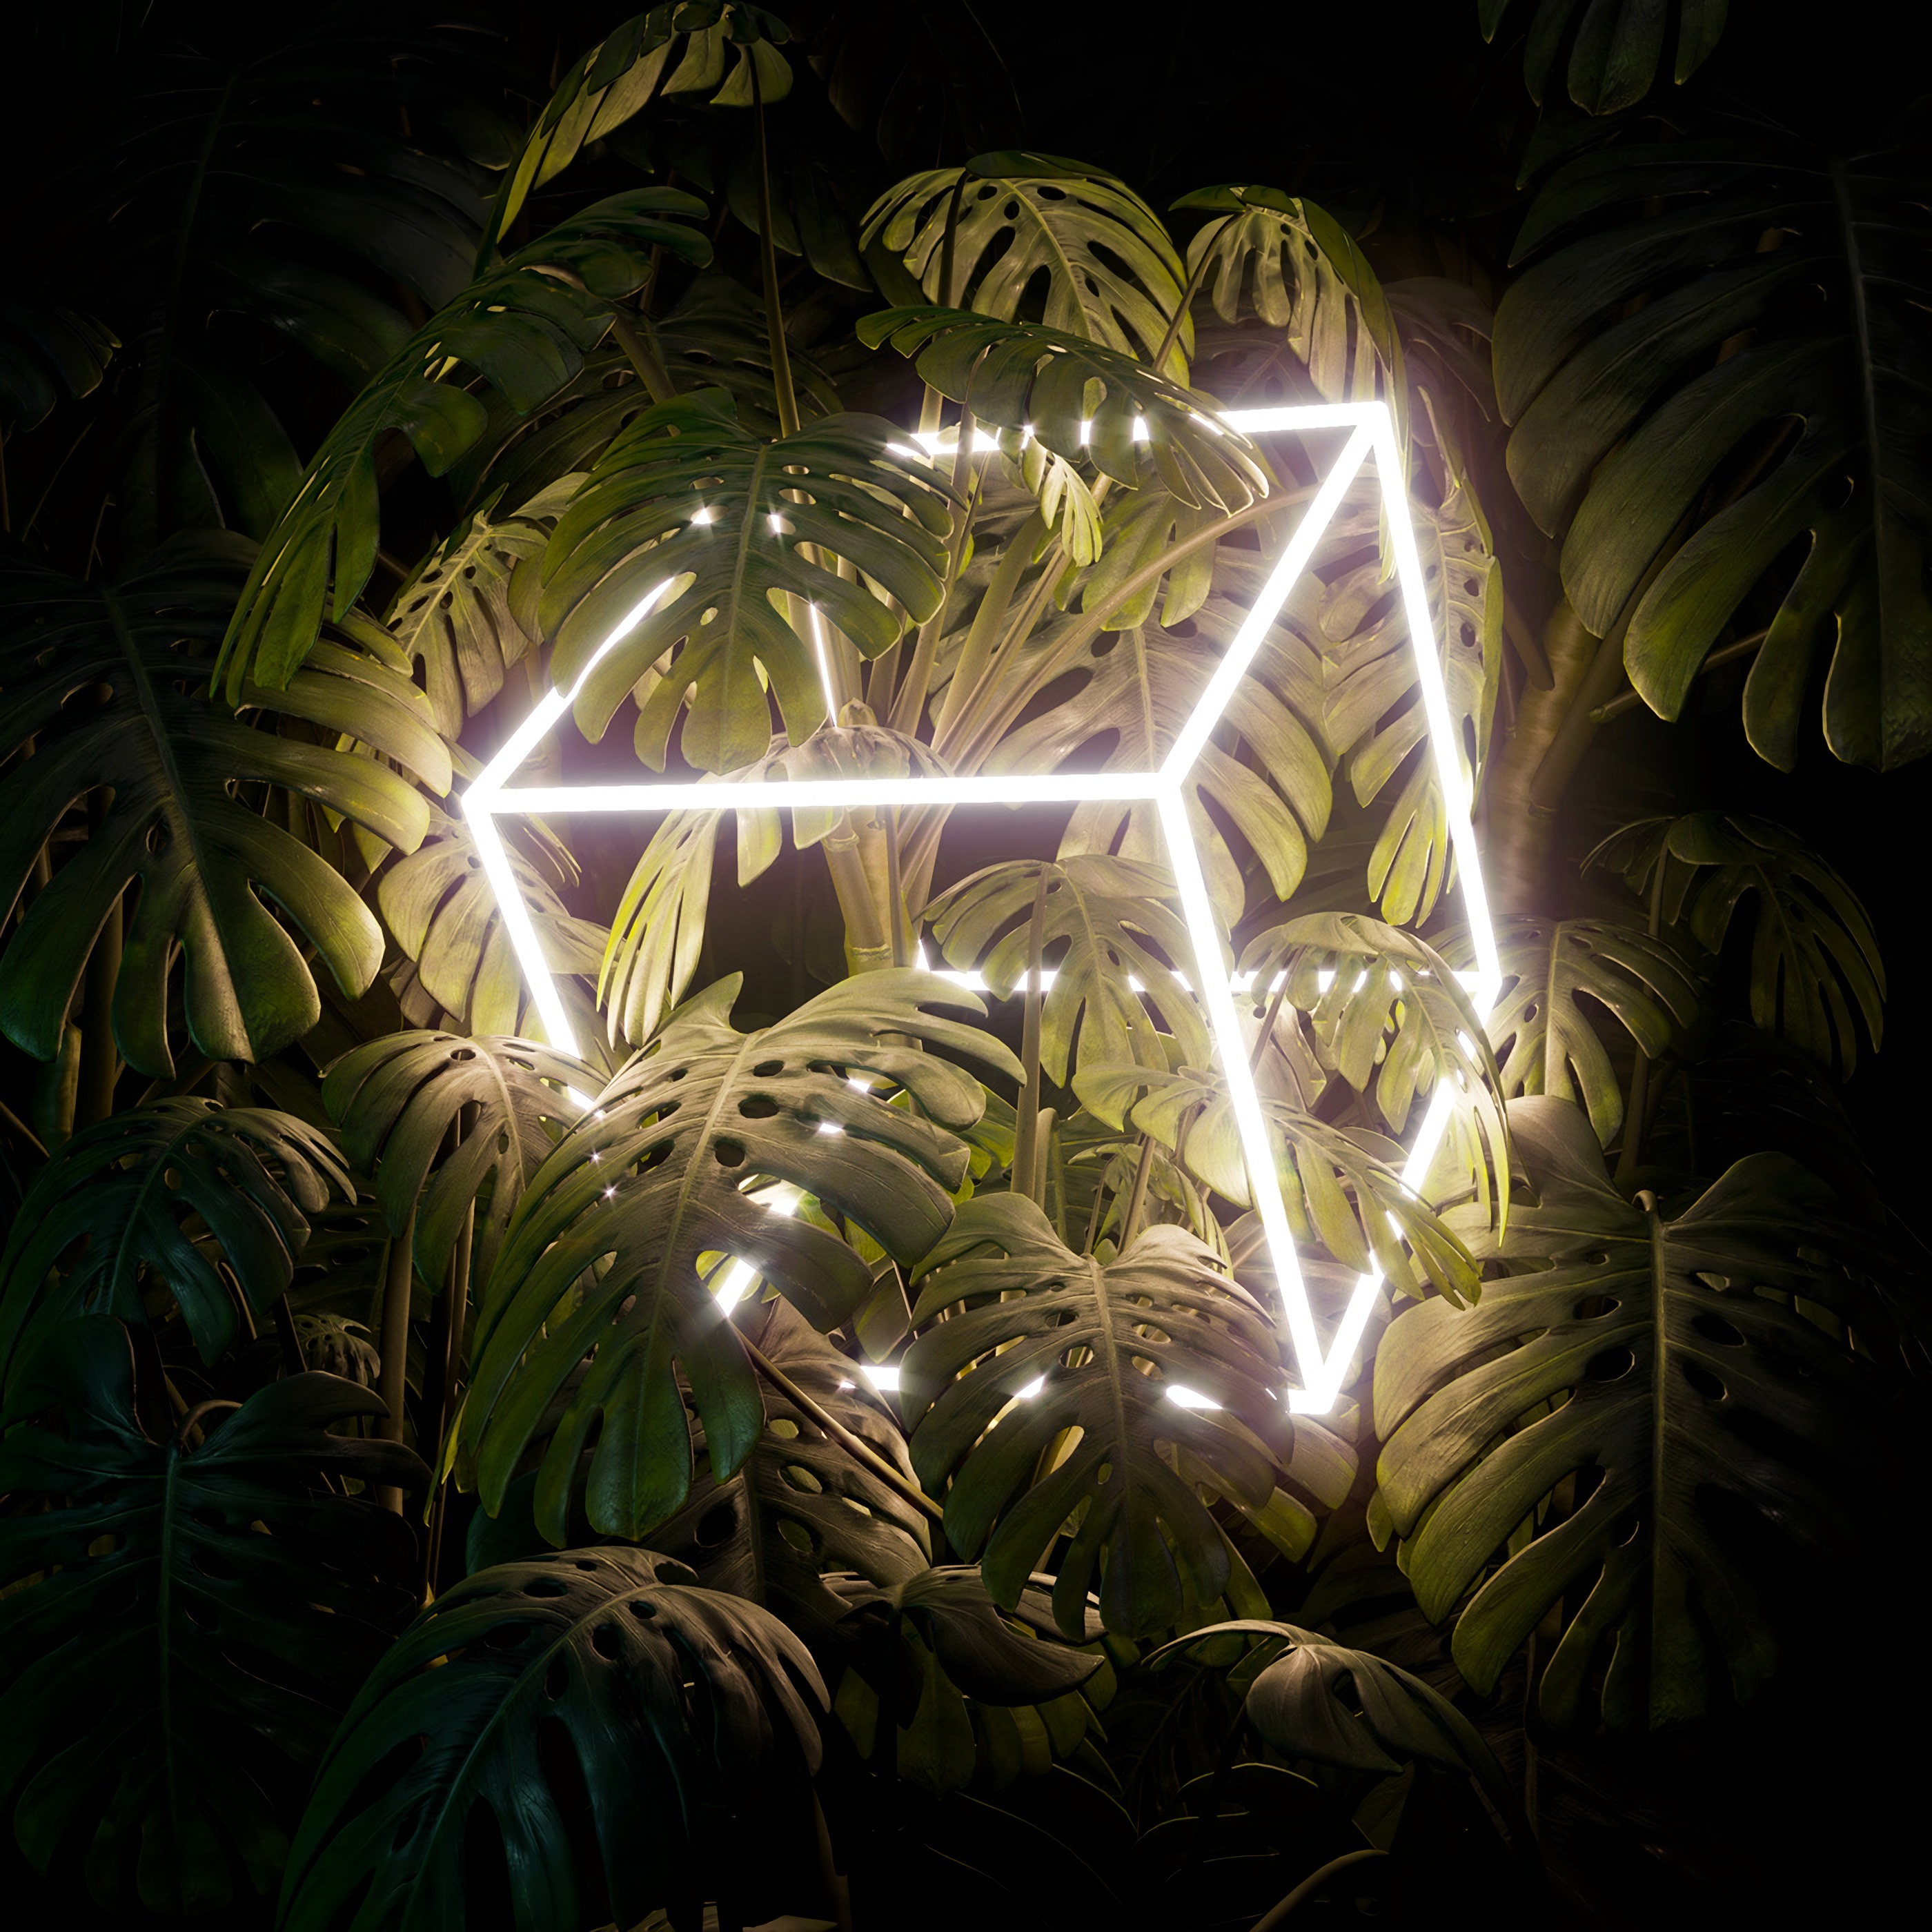 Widescreen image glow, plant, cube, neon